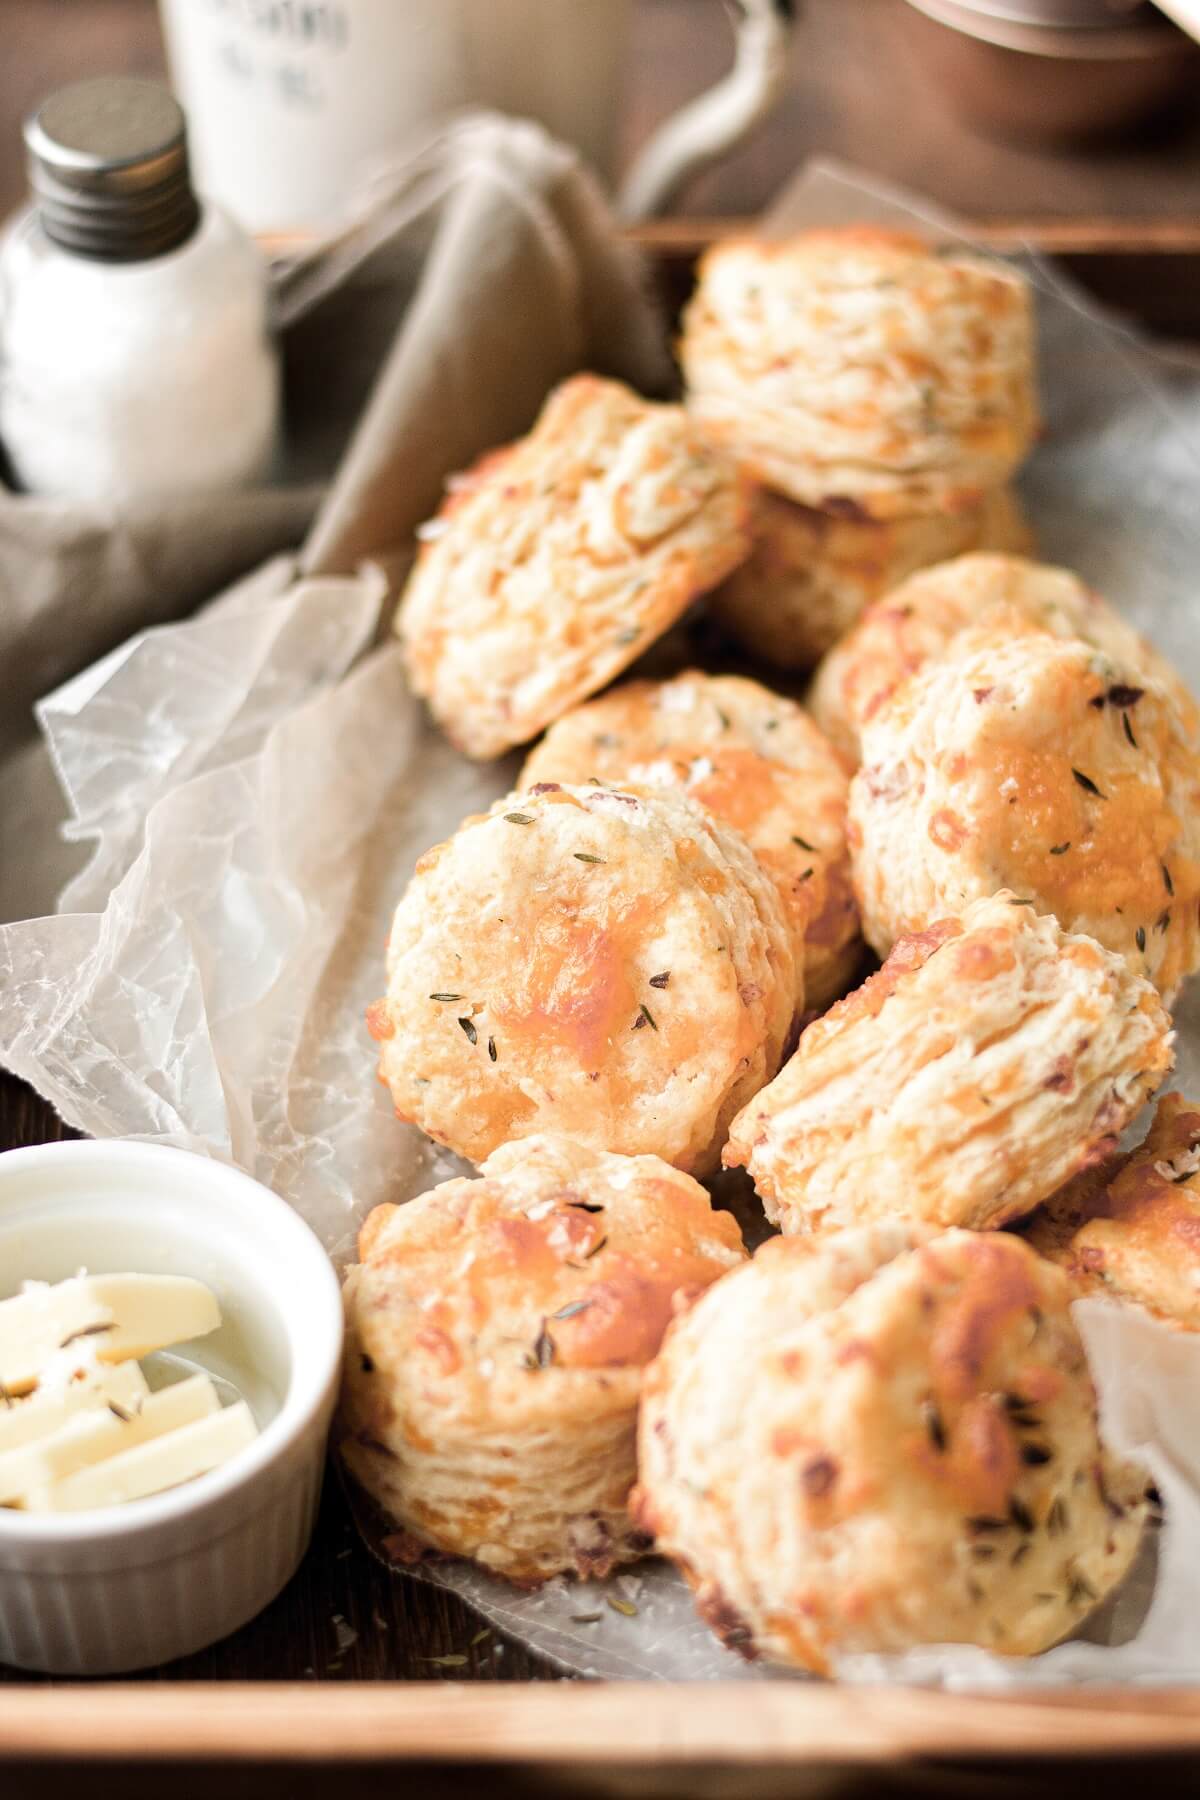 Cheesy herb biscuits arranged on a wooden tray with butter and salt.